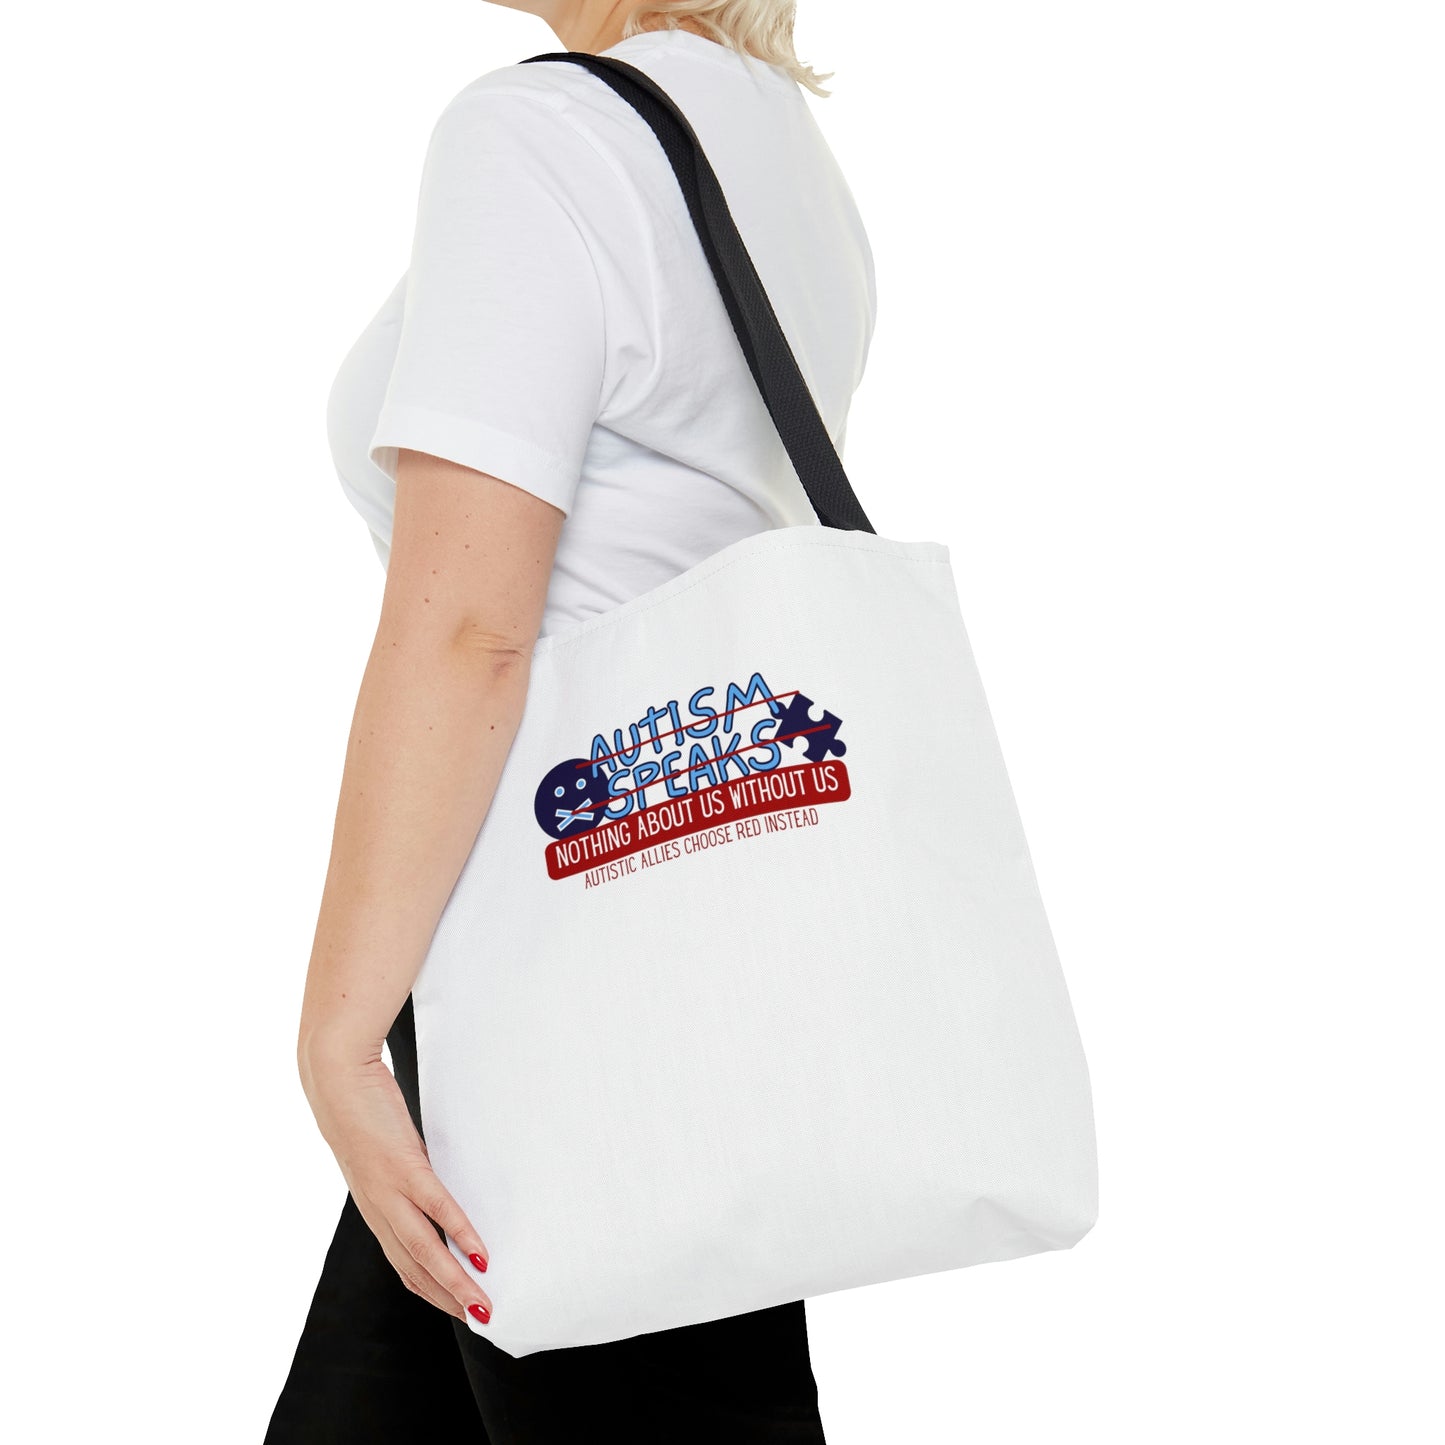 Say No to Autism Speaks Tote Bag in 3 sizes